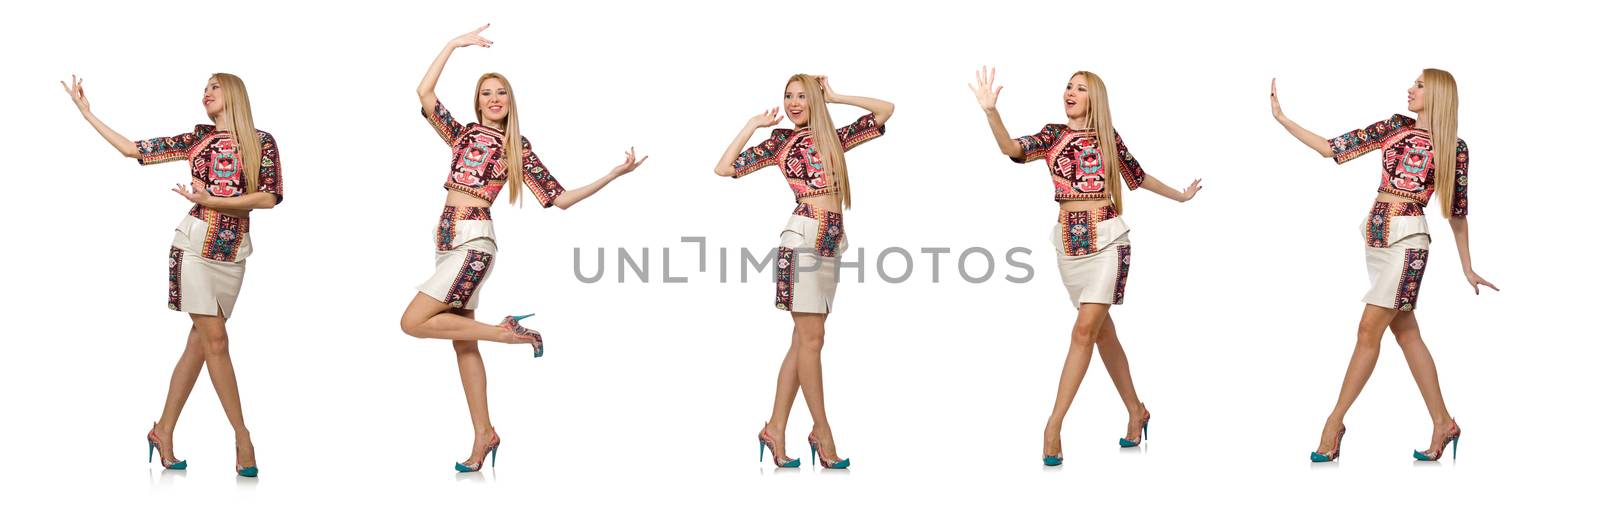 Pretty model in clothes with carpet prints isolated on white by Elnur